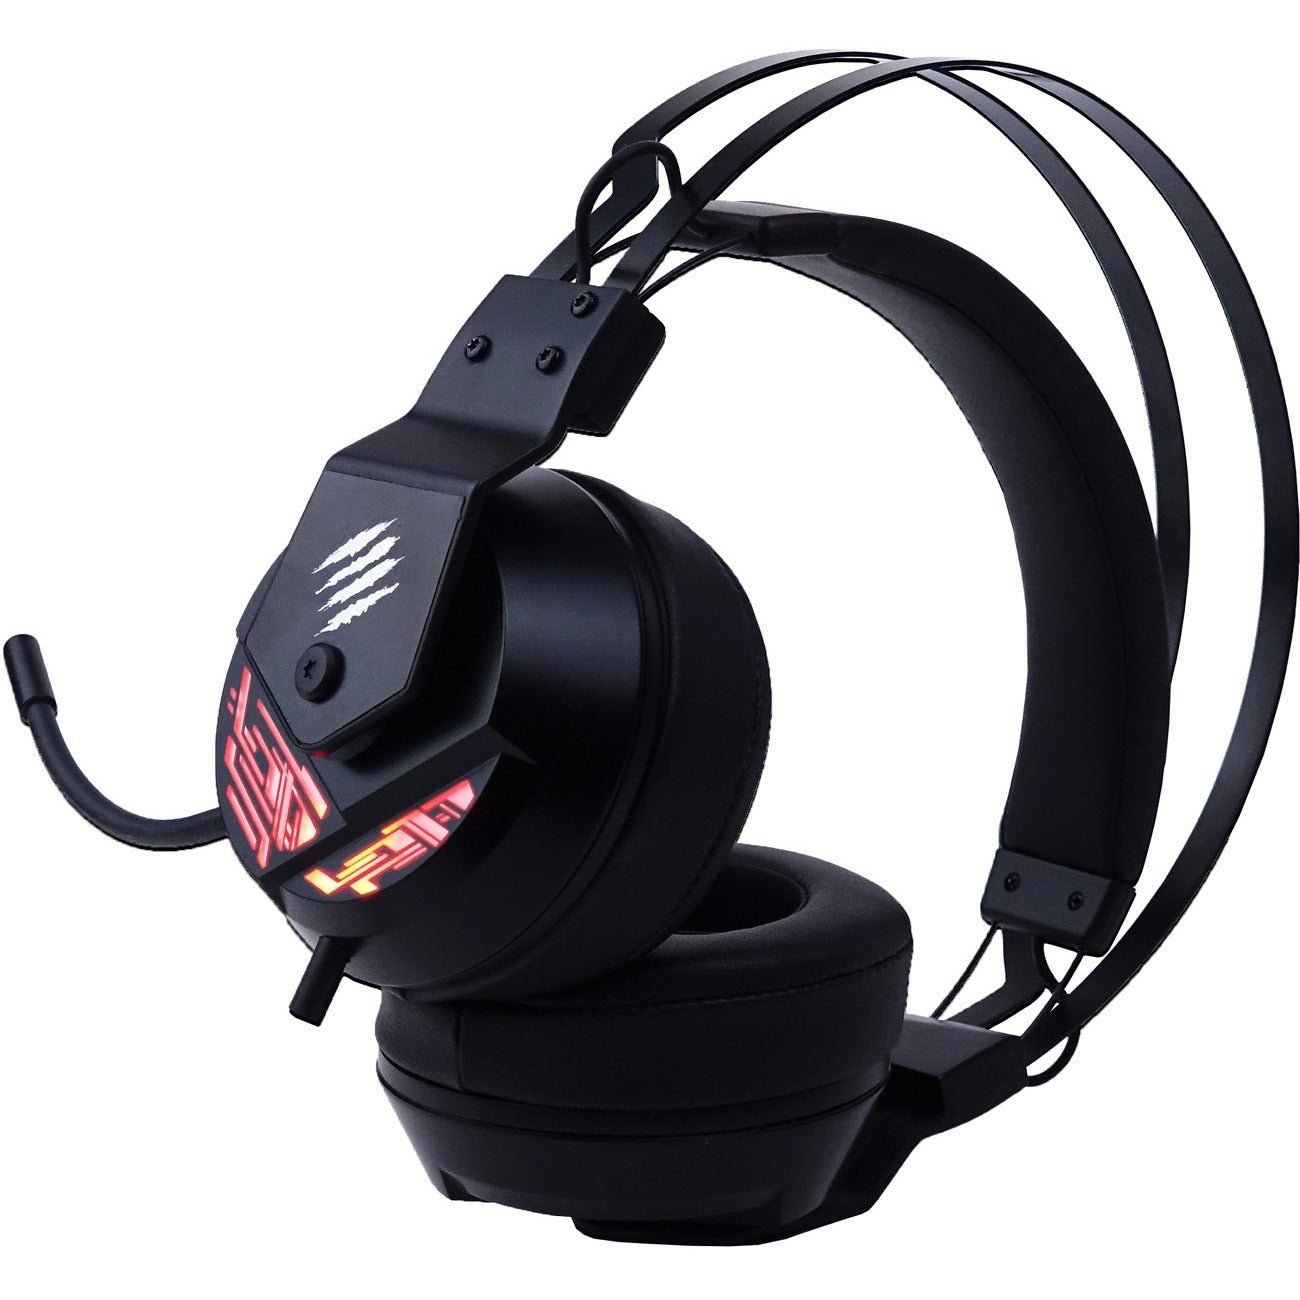 mad-catz-the-authentic-freq-4-gaming-headset-black-stereo-usb-wired-over-the-head-binaural-circumaural-omni-directional-noise-cancelling-microphone-black_mdcaf13c2inbl00 - 3